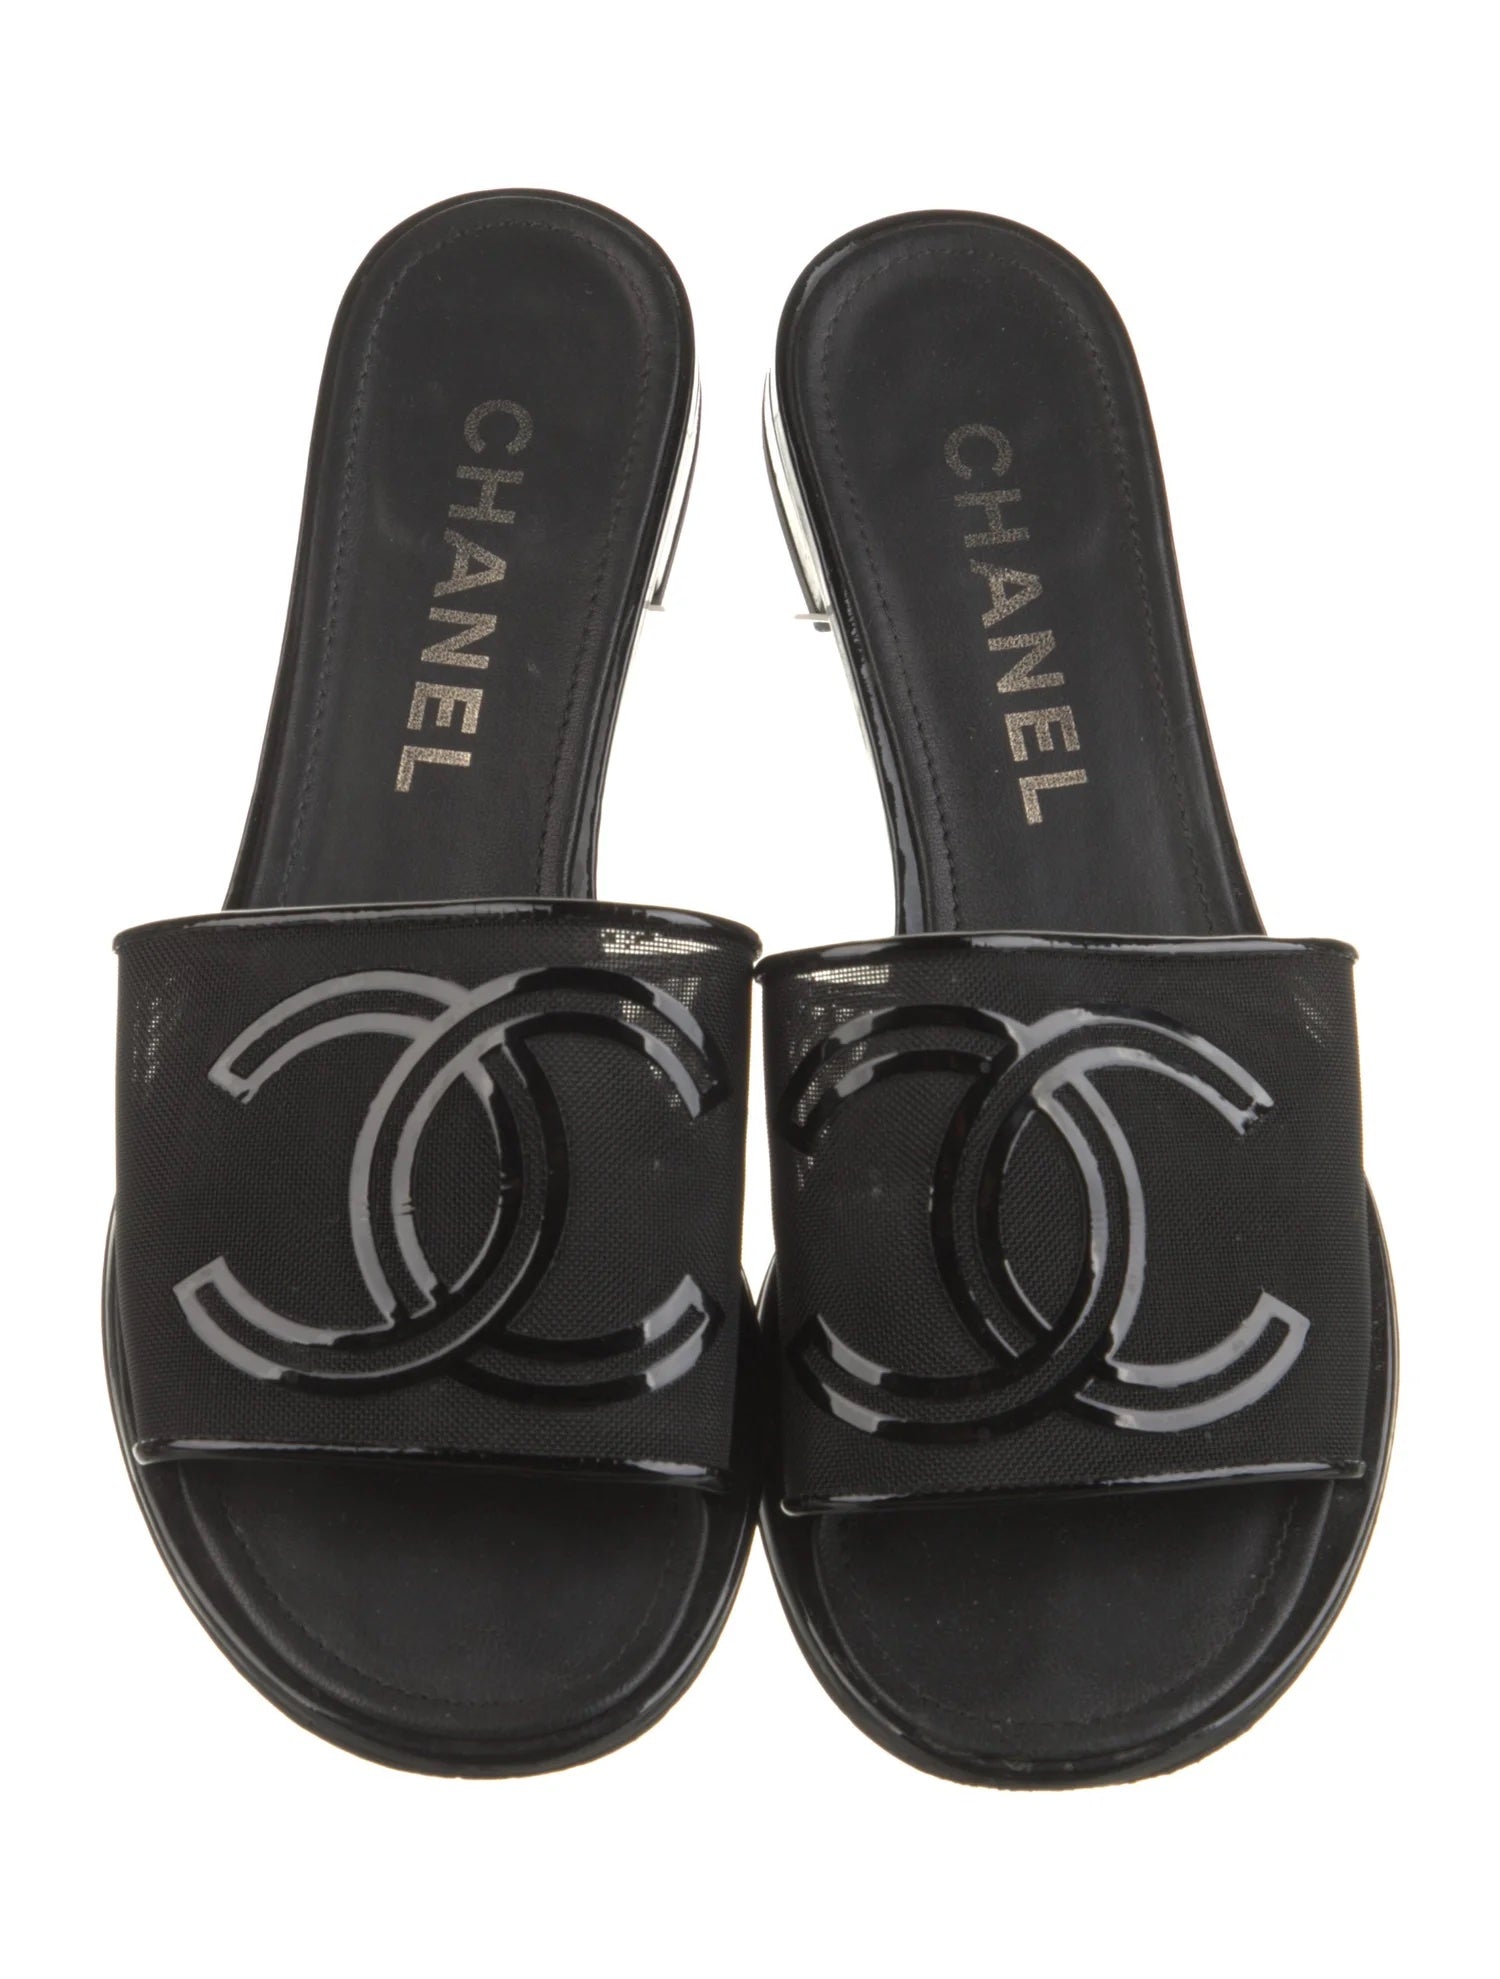 Chanel Lambskin Embroidered CC Mule Sandal 37 Black White